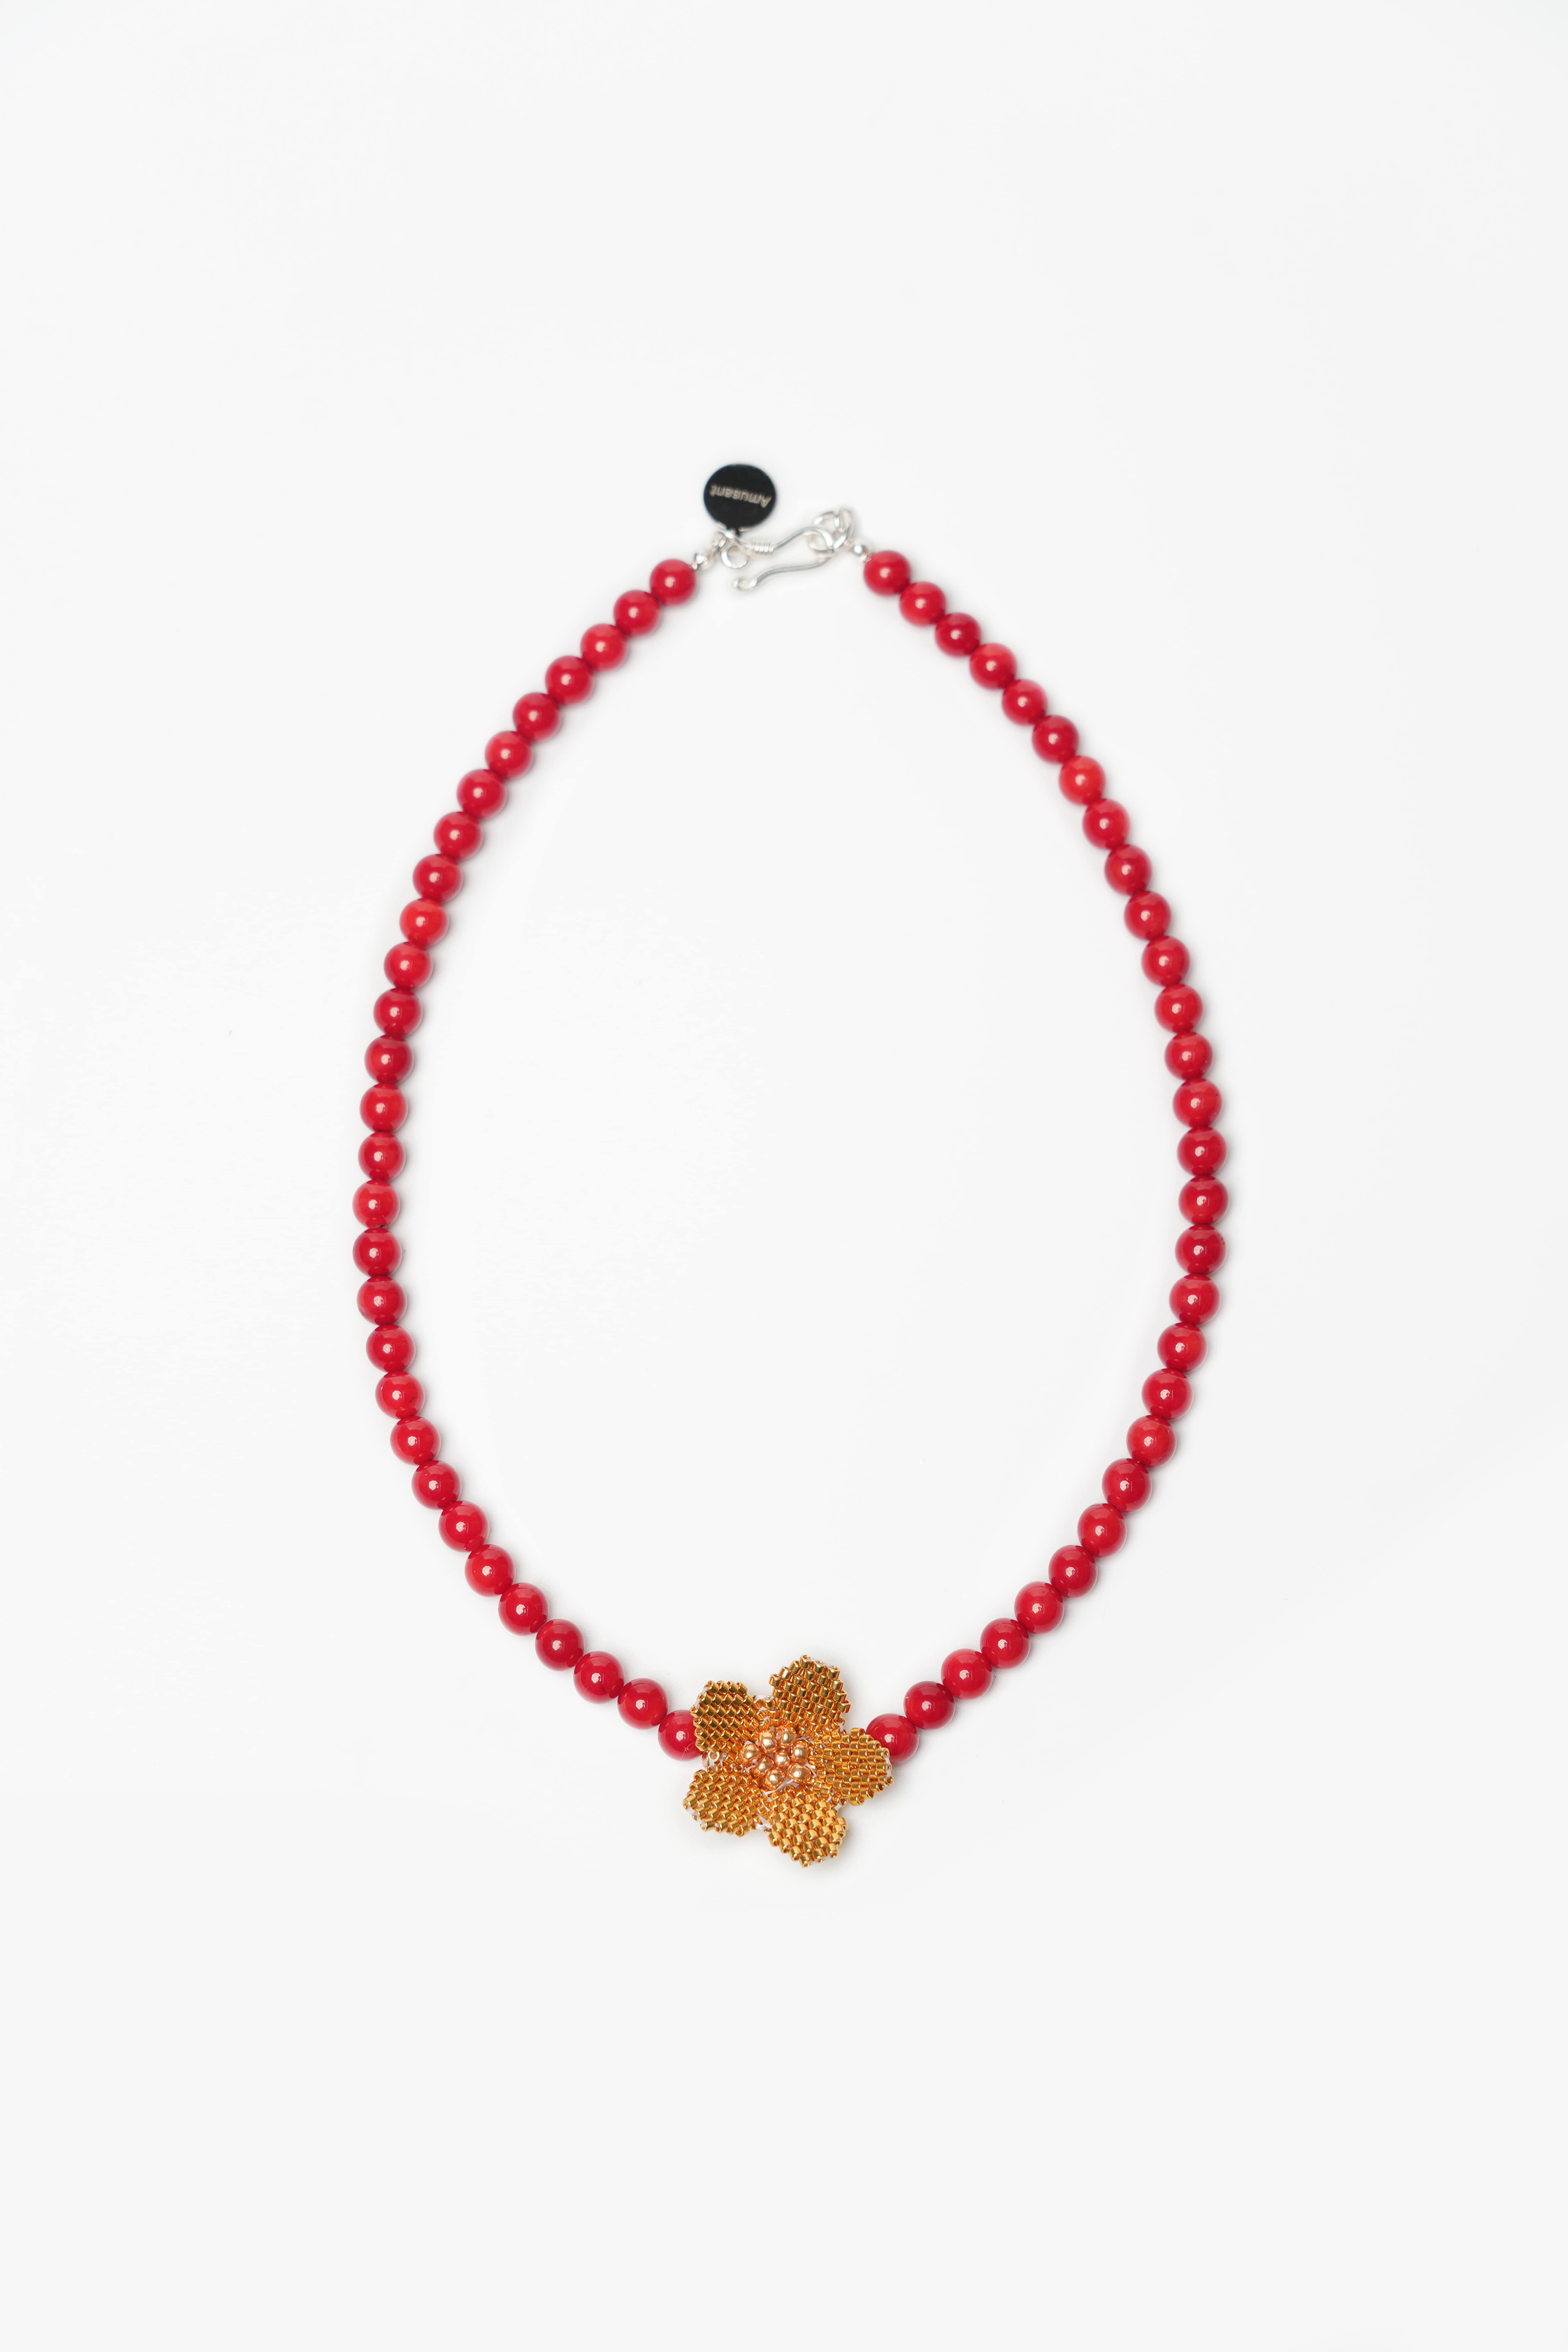 RED FLOWER BEADS NECKLACE